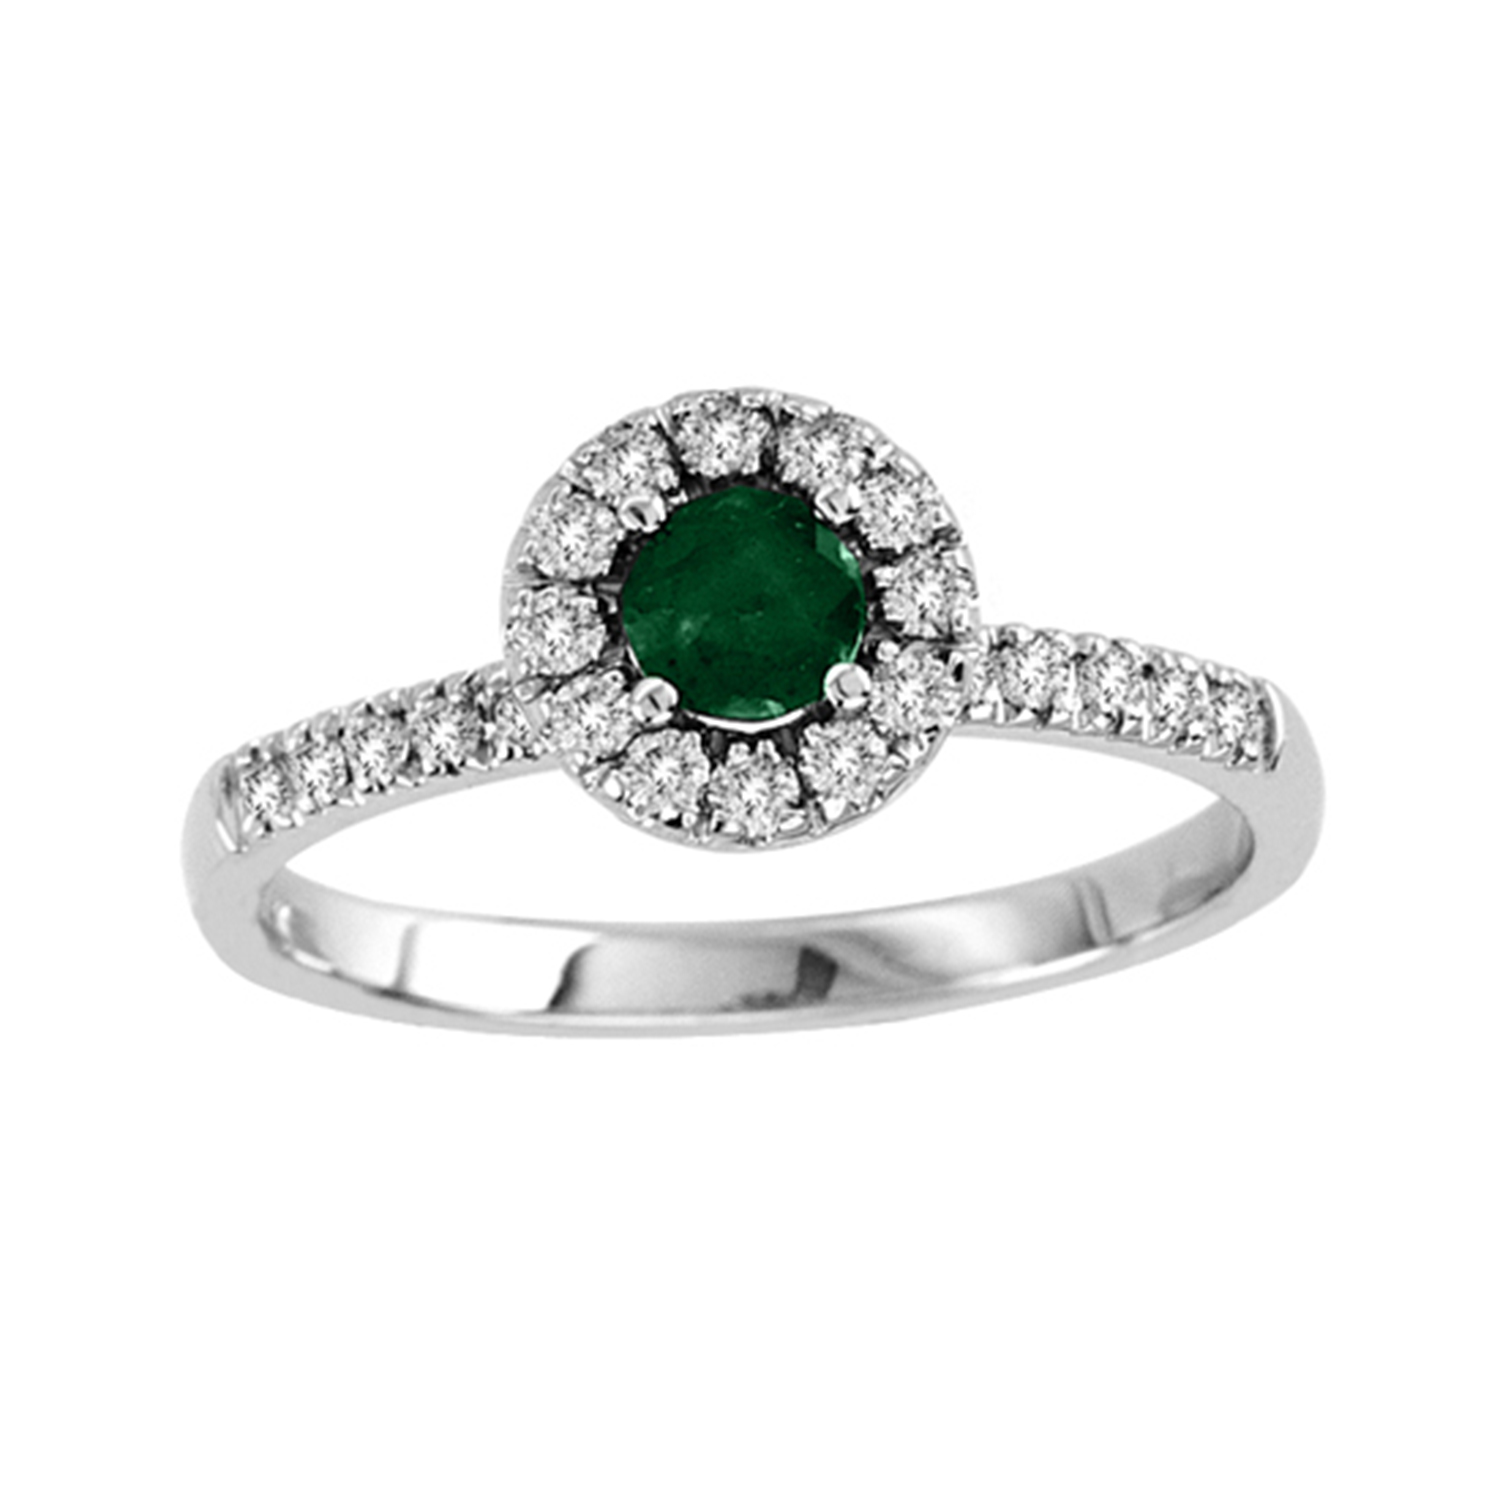 0.58cttw Emerald and Diamond Halo ring set in 14k Gold